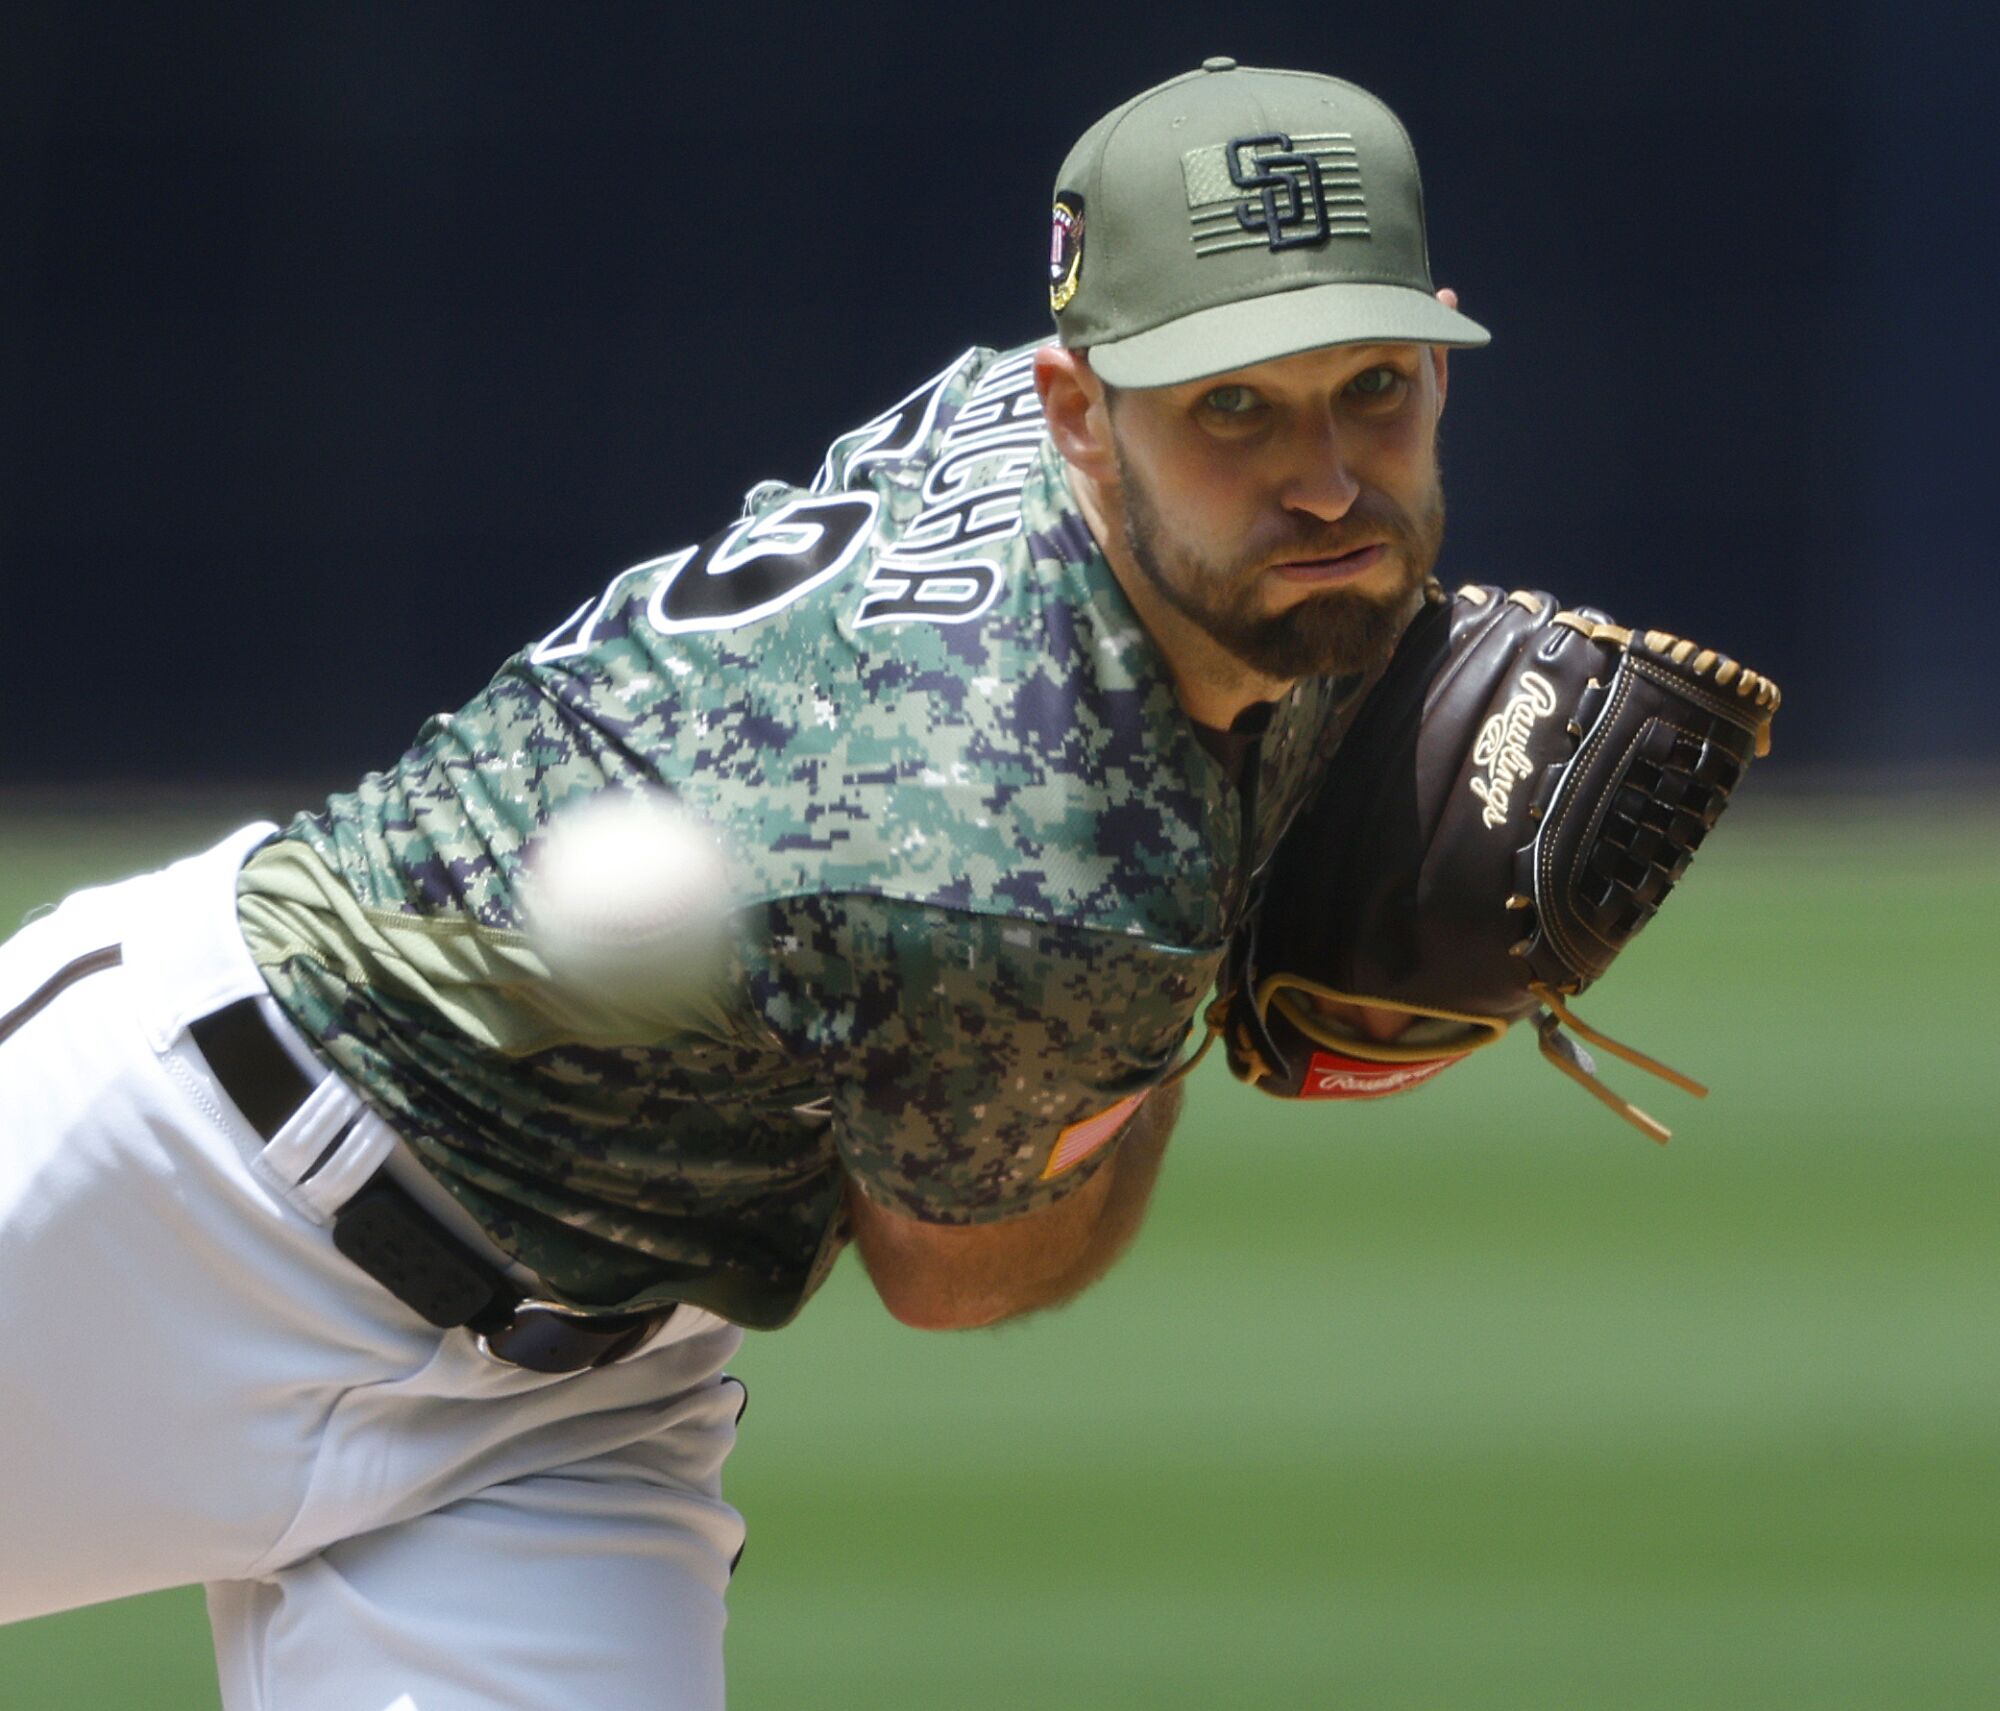 Padres pitcher Michael Wacha throws against the Boston Red Sox in Sunday's game.